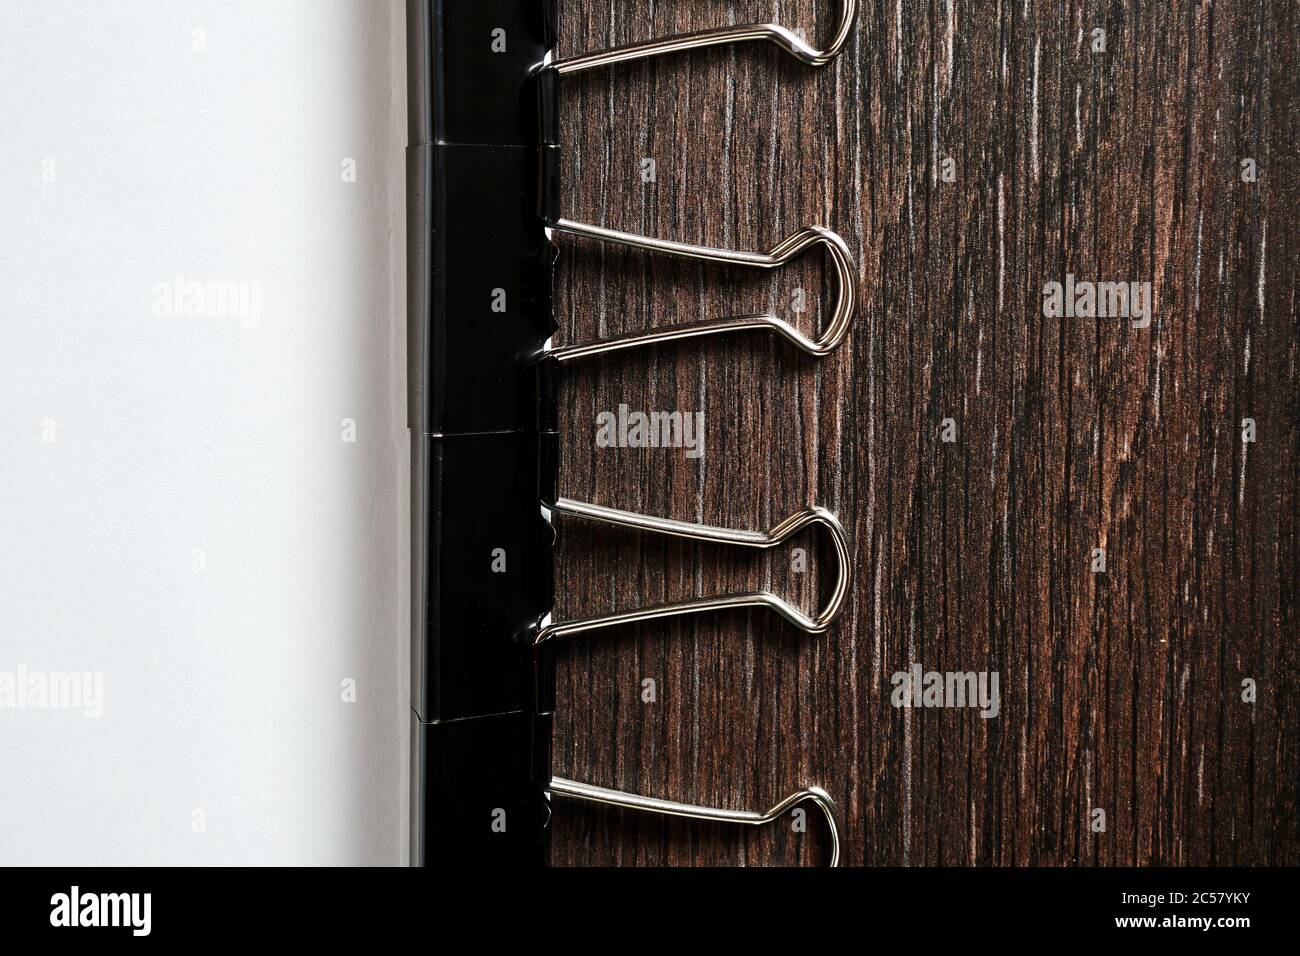 The chain of black metallic paper clips pins the white paper sheet on the wooden table in the home office Stock Photo